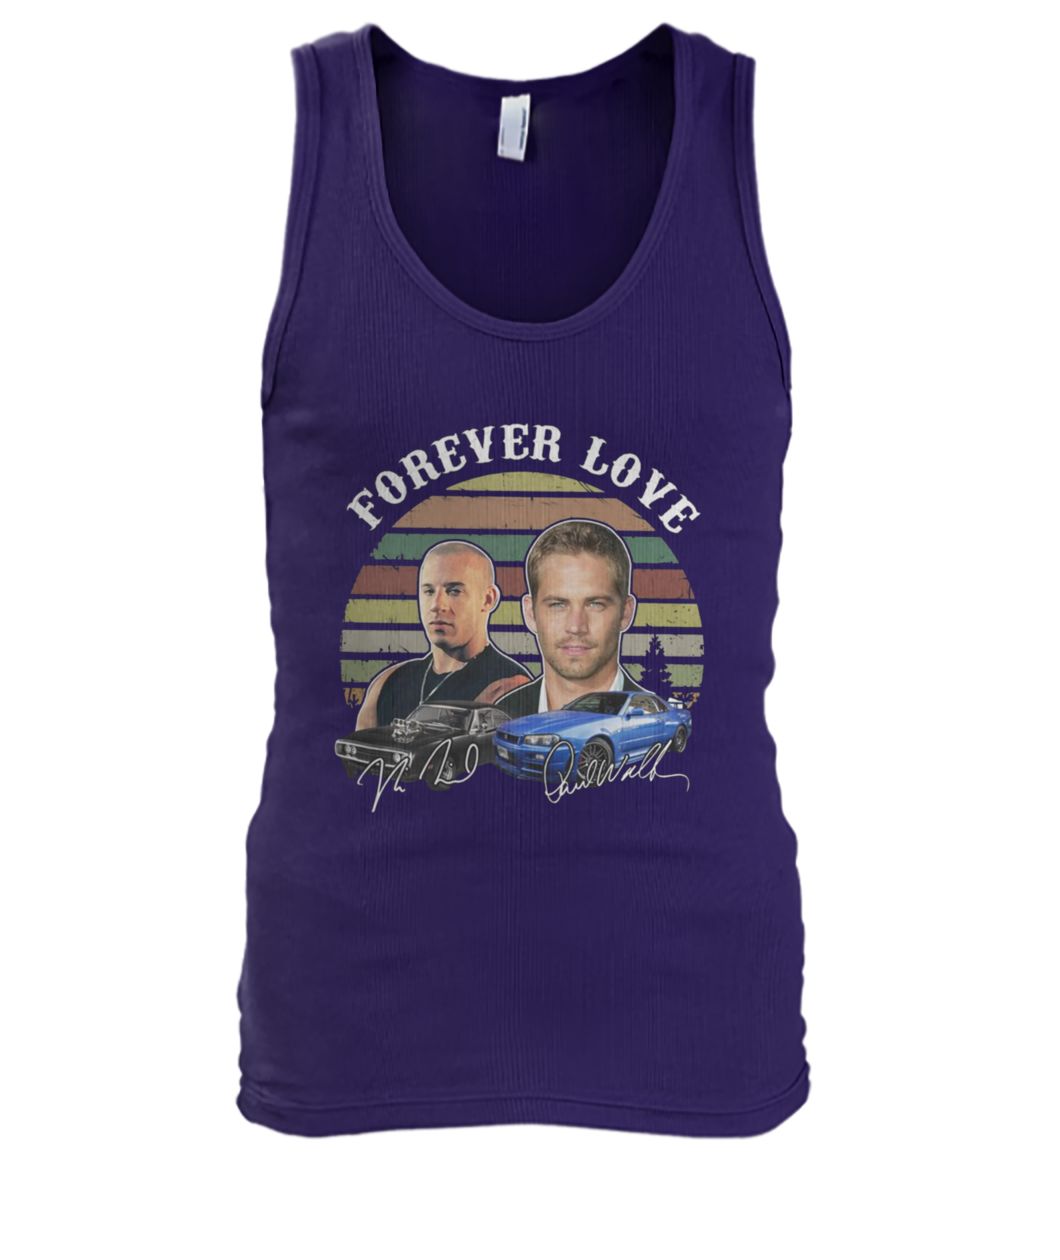 Forever love fast and furious vintage signatures men's tank top